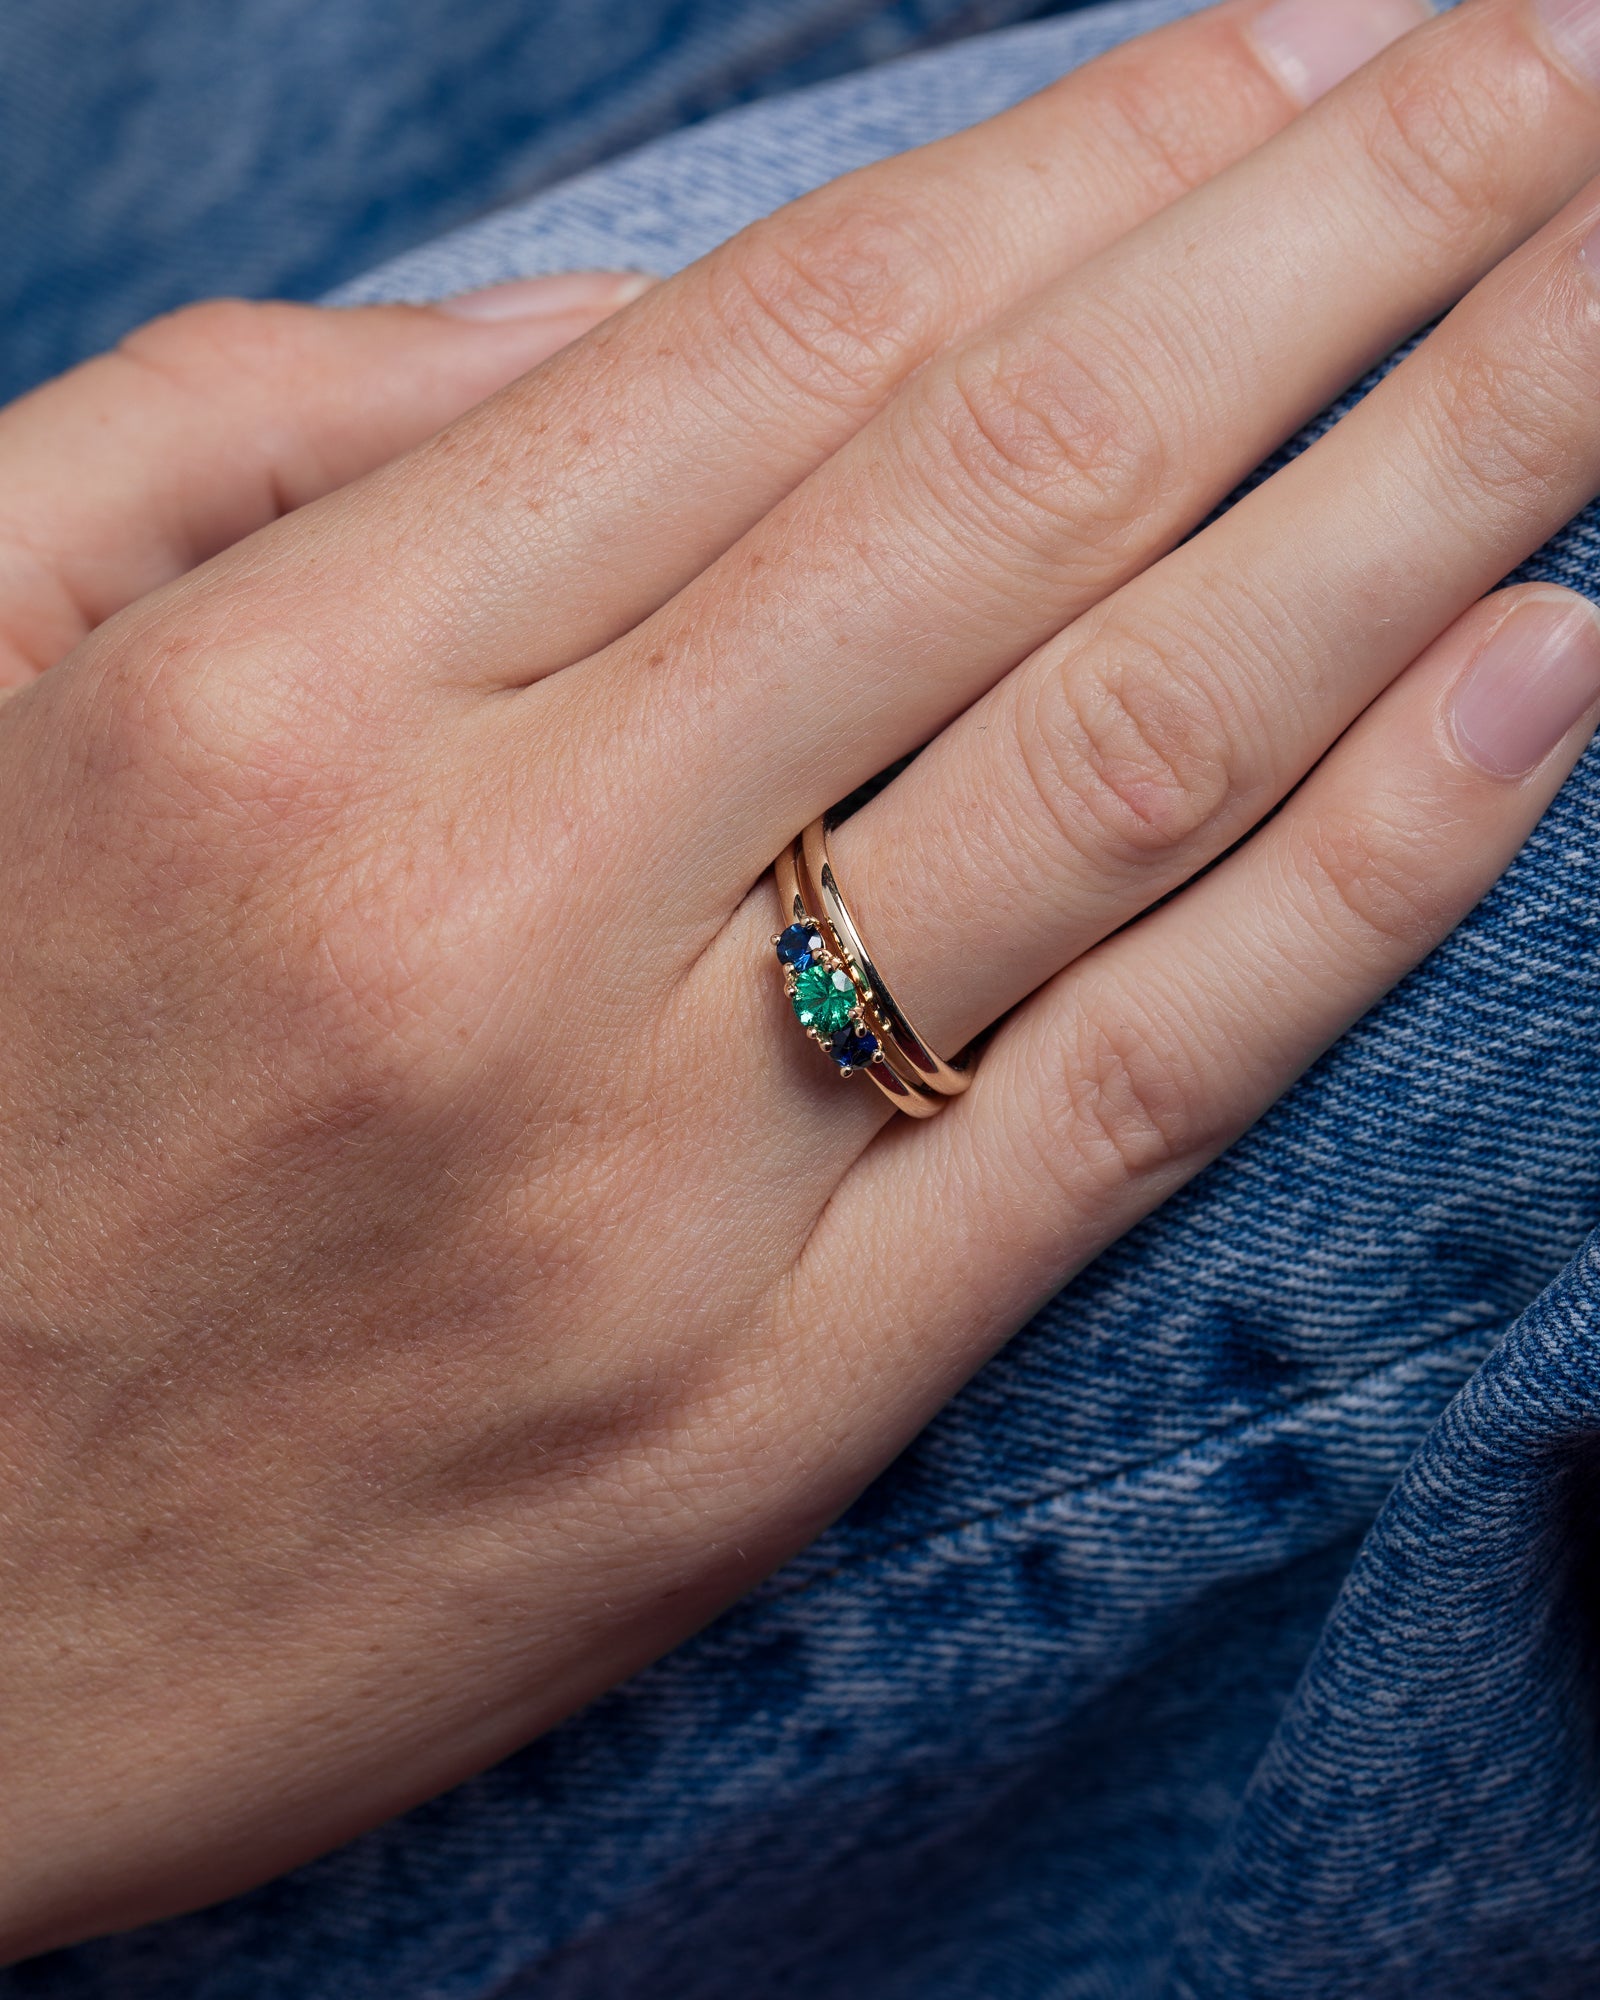 Trio Ring in Fairmined Gold with Montana Sapphires and Brazilian Emerald